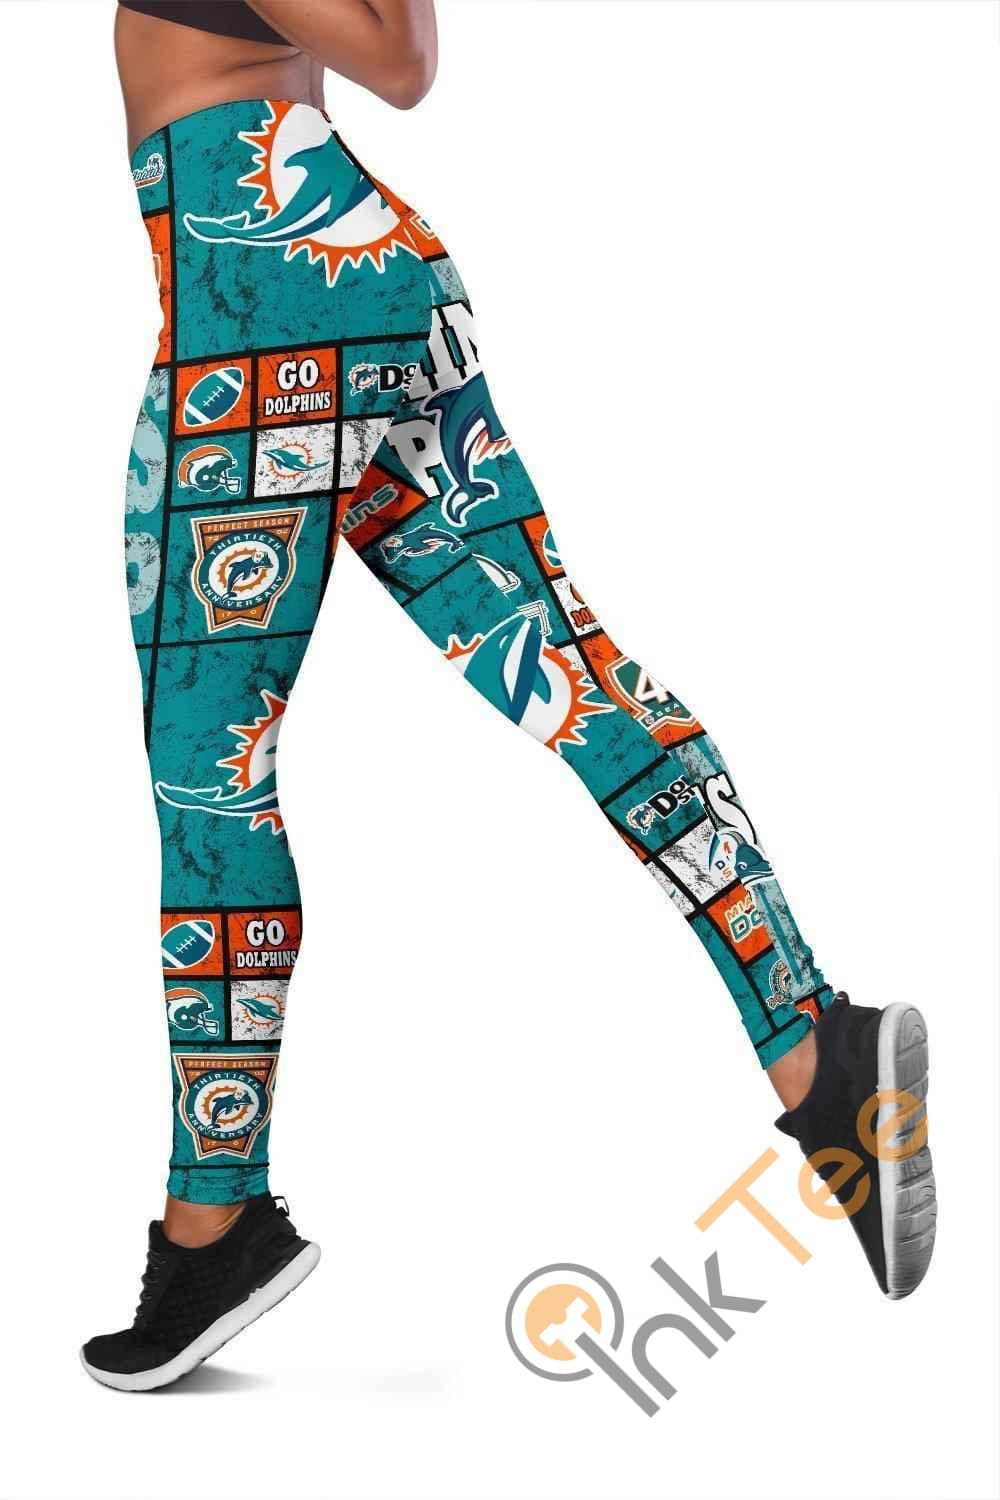 Inktee Store - Miami Dolphins 3D All Over Print For Yoga Fitness Women'S Leggings Image